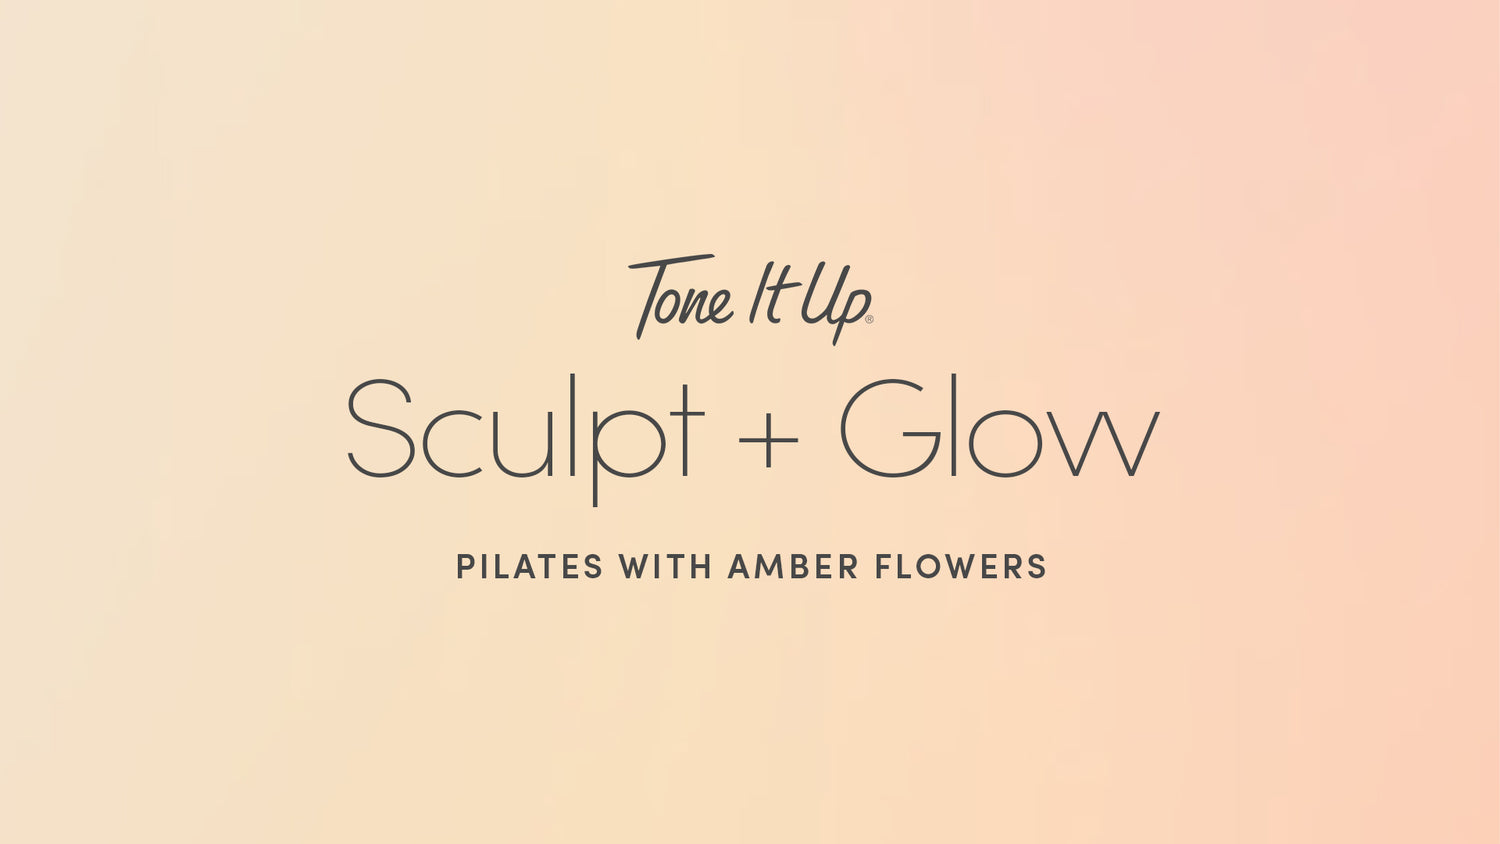 Tone It Up Pilates Sculpt and Glow Program with Amber Flowers Fitness Workout Routines